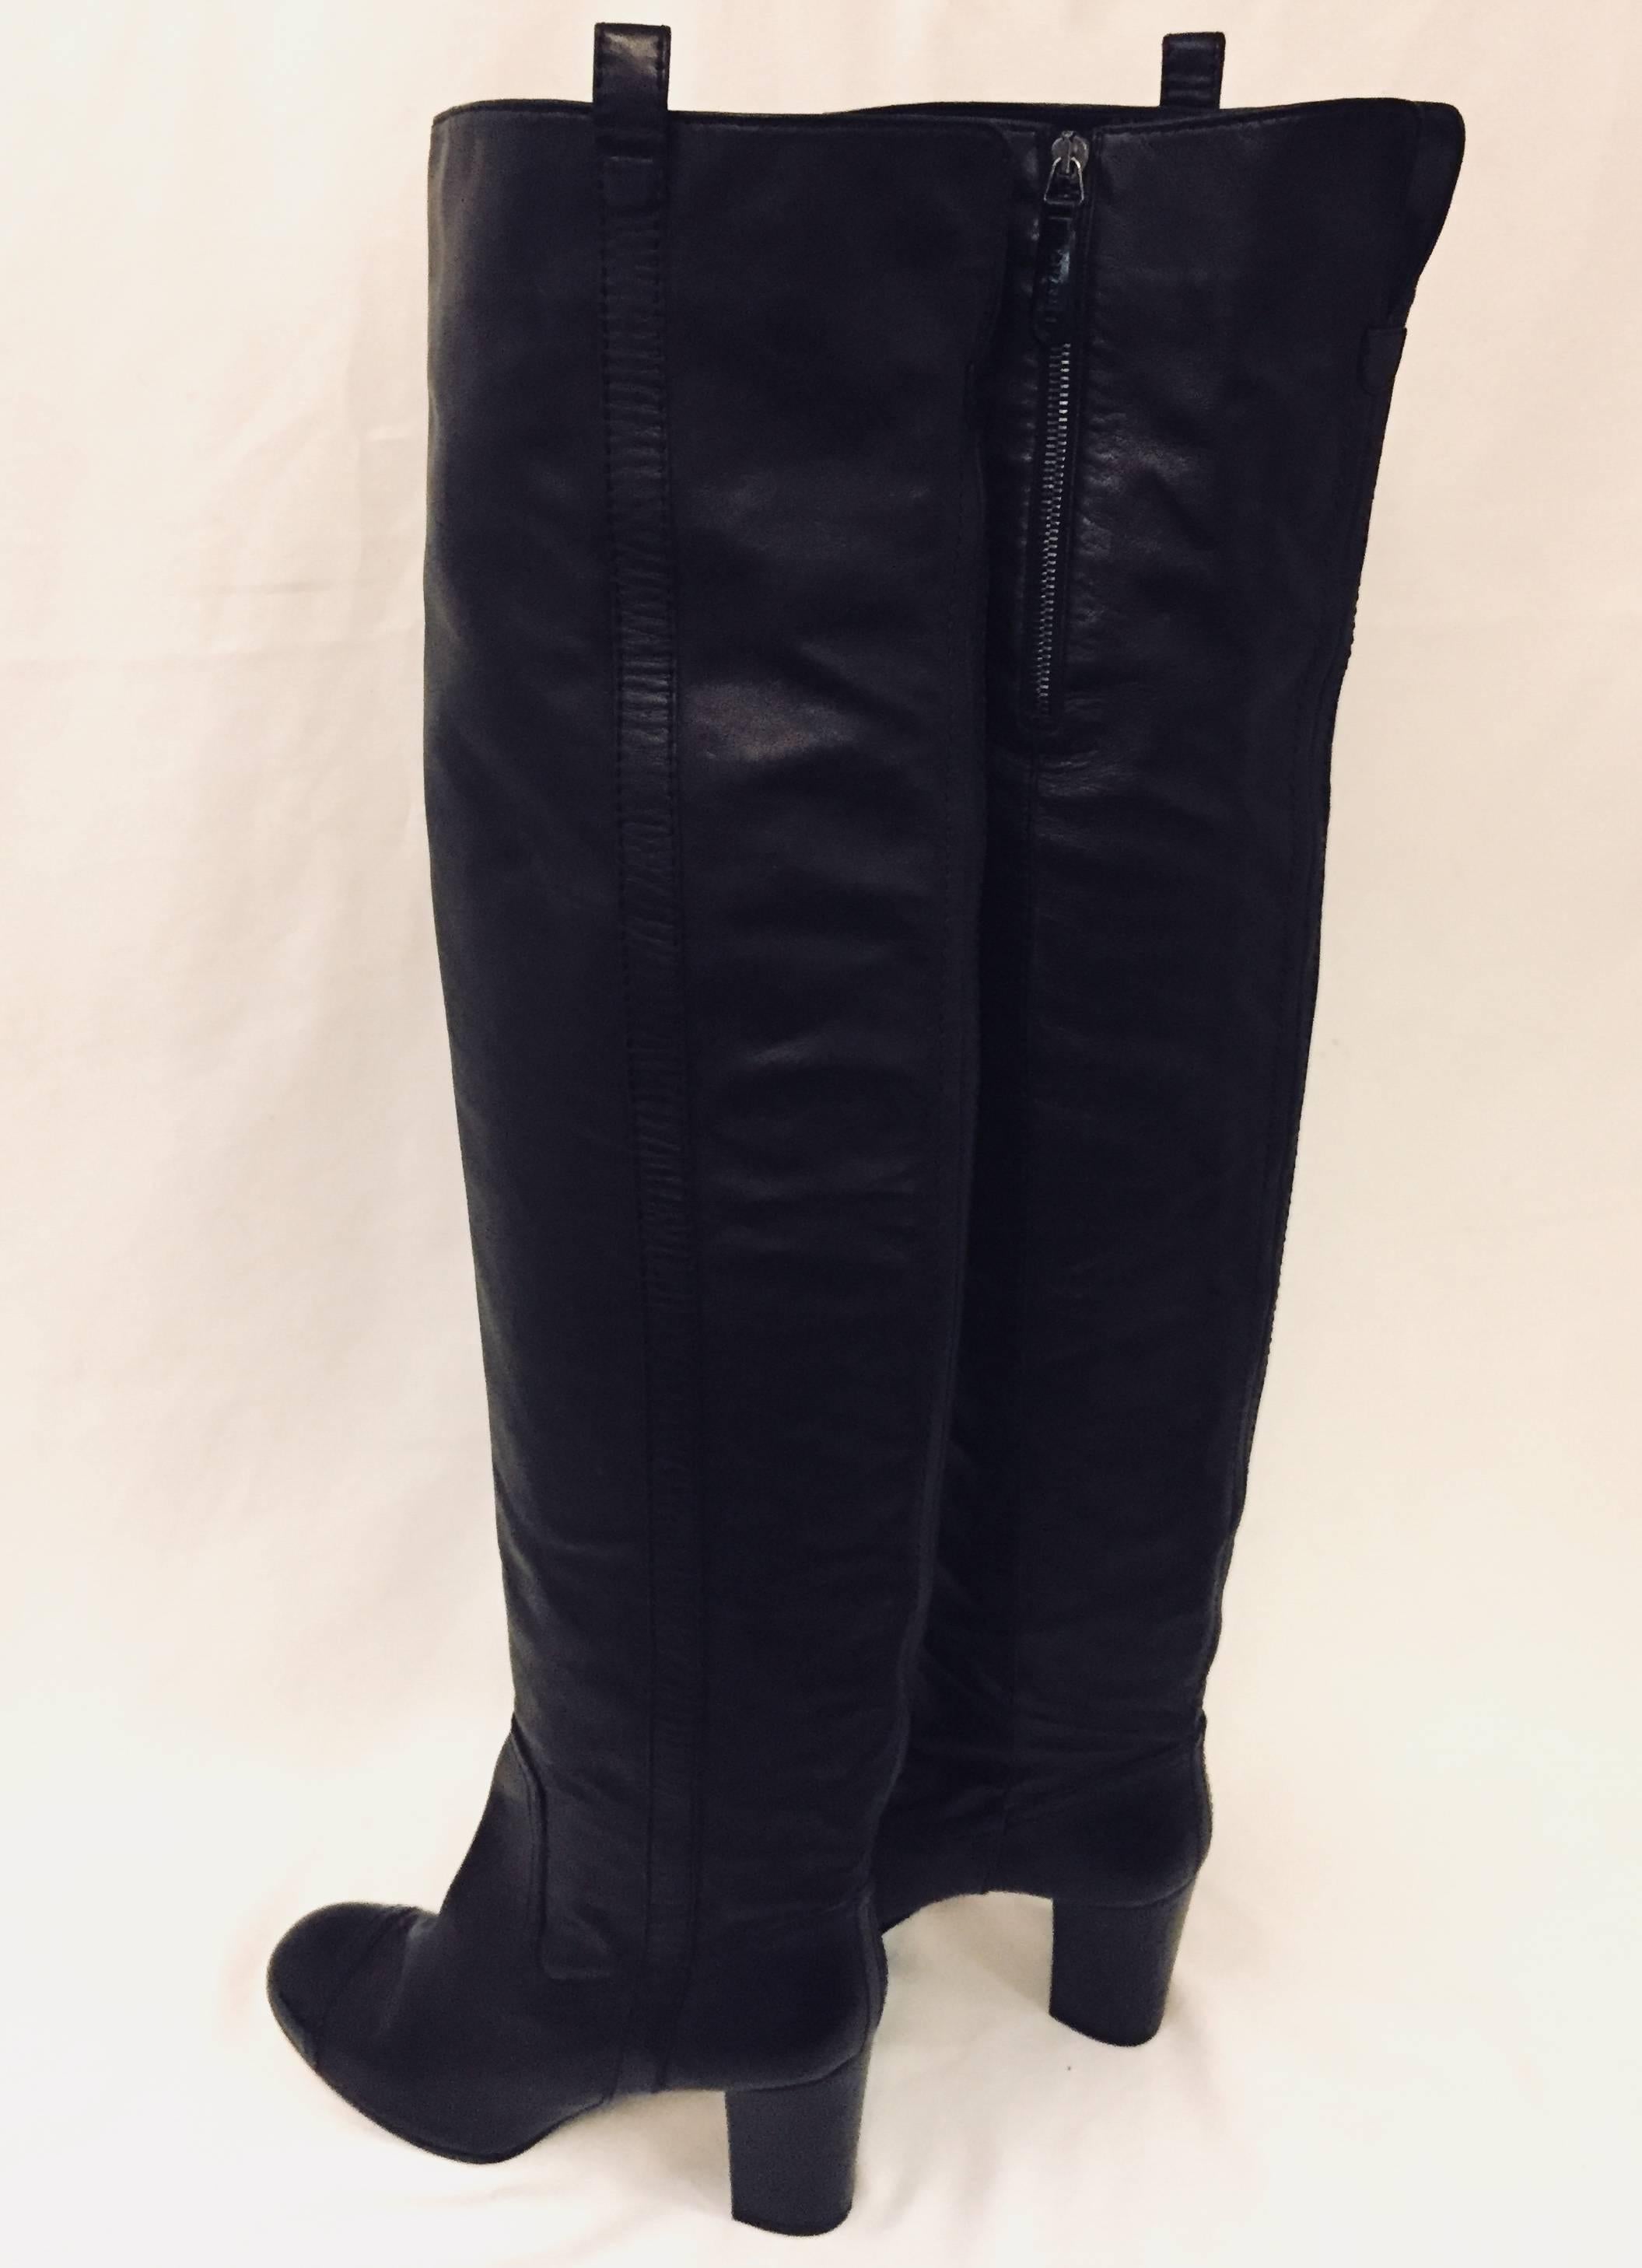 Chanel Black Leather Over The Knee High Heel Boots With Black Patent Cap Toes For Sale 2